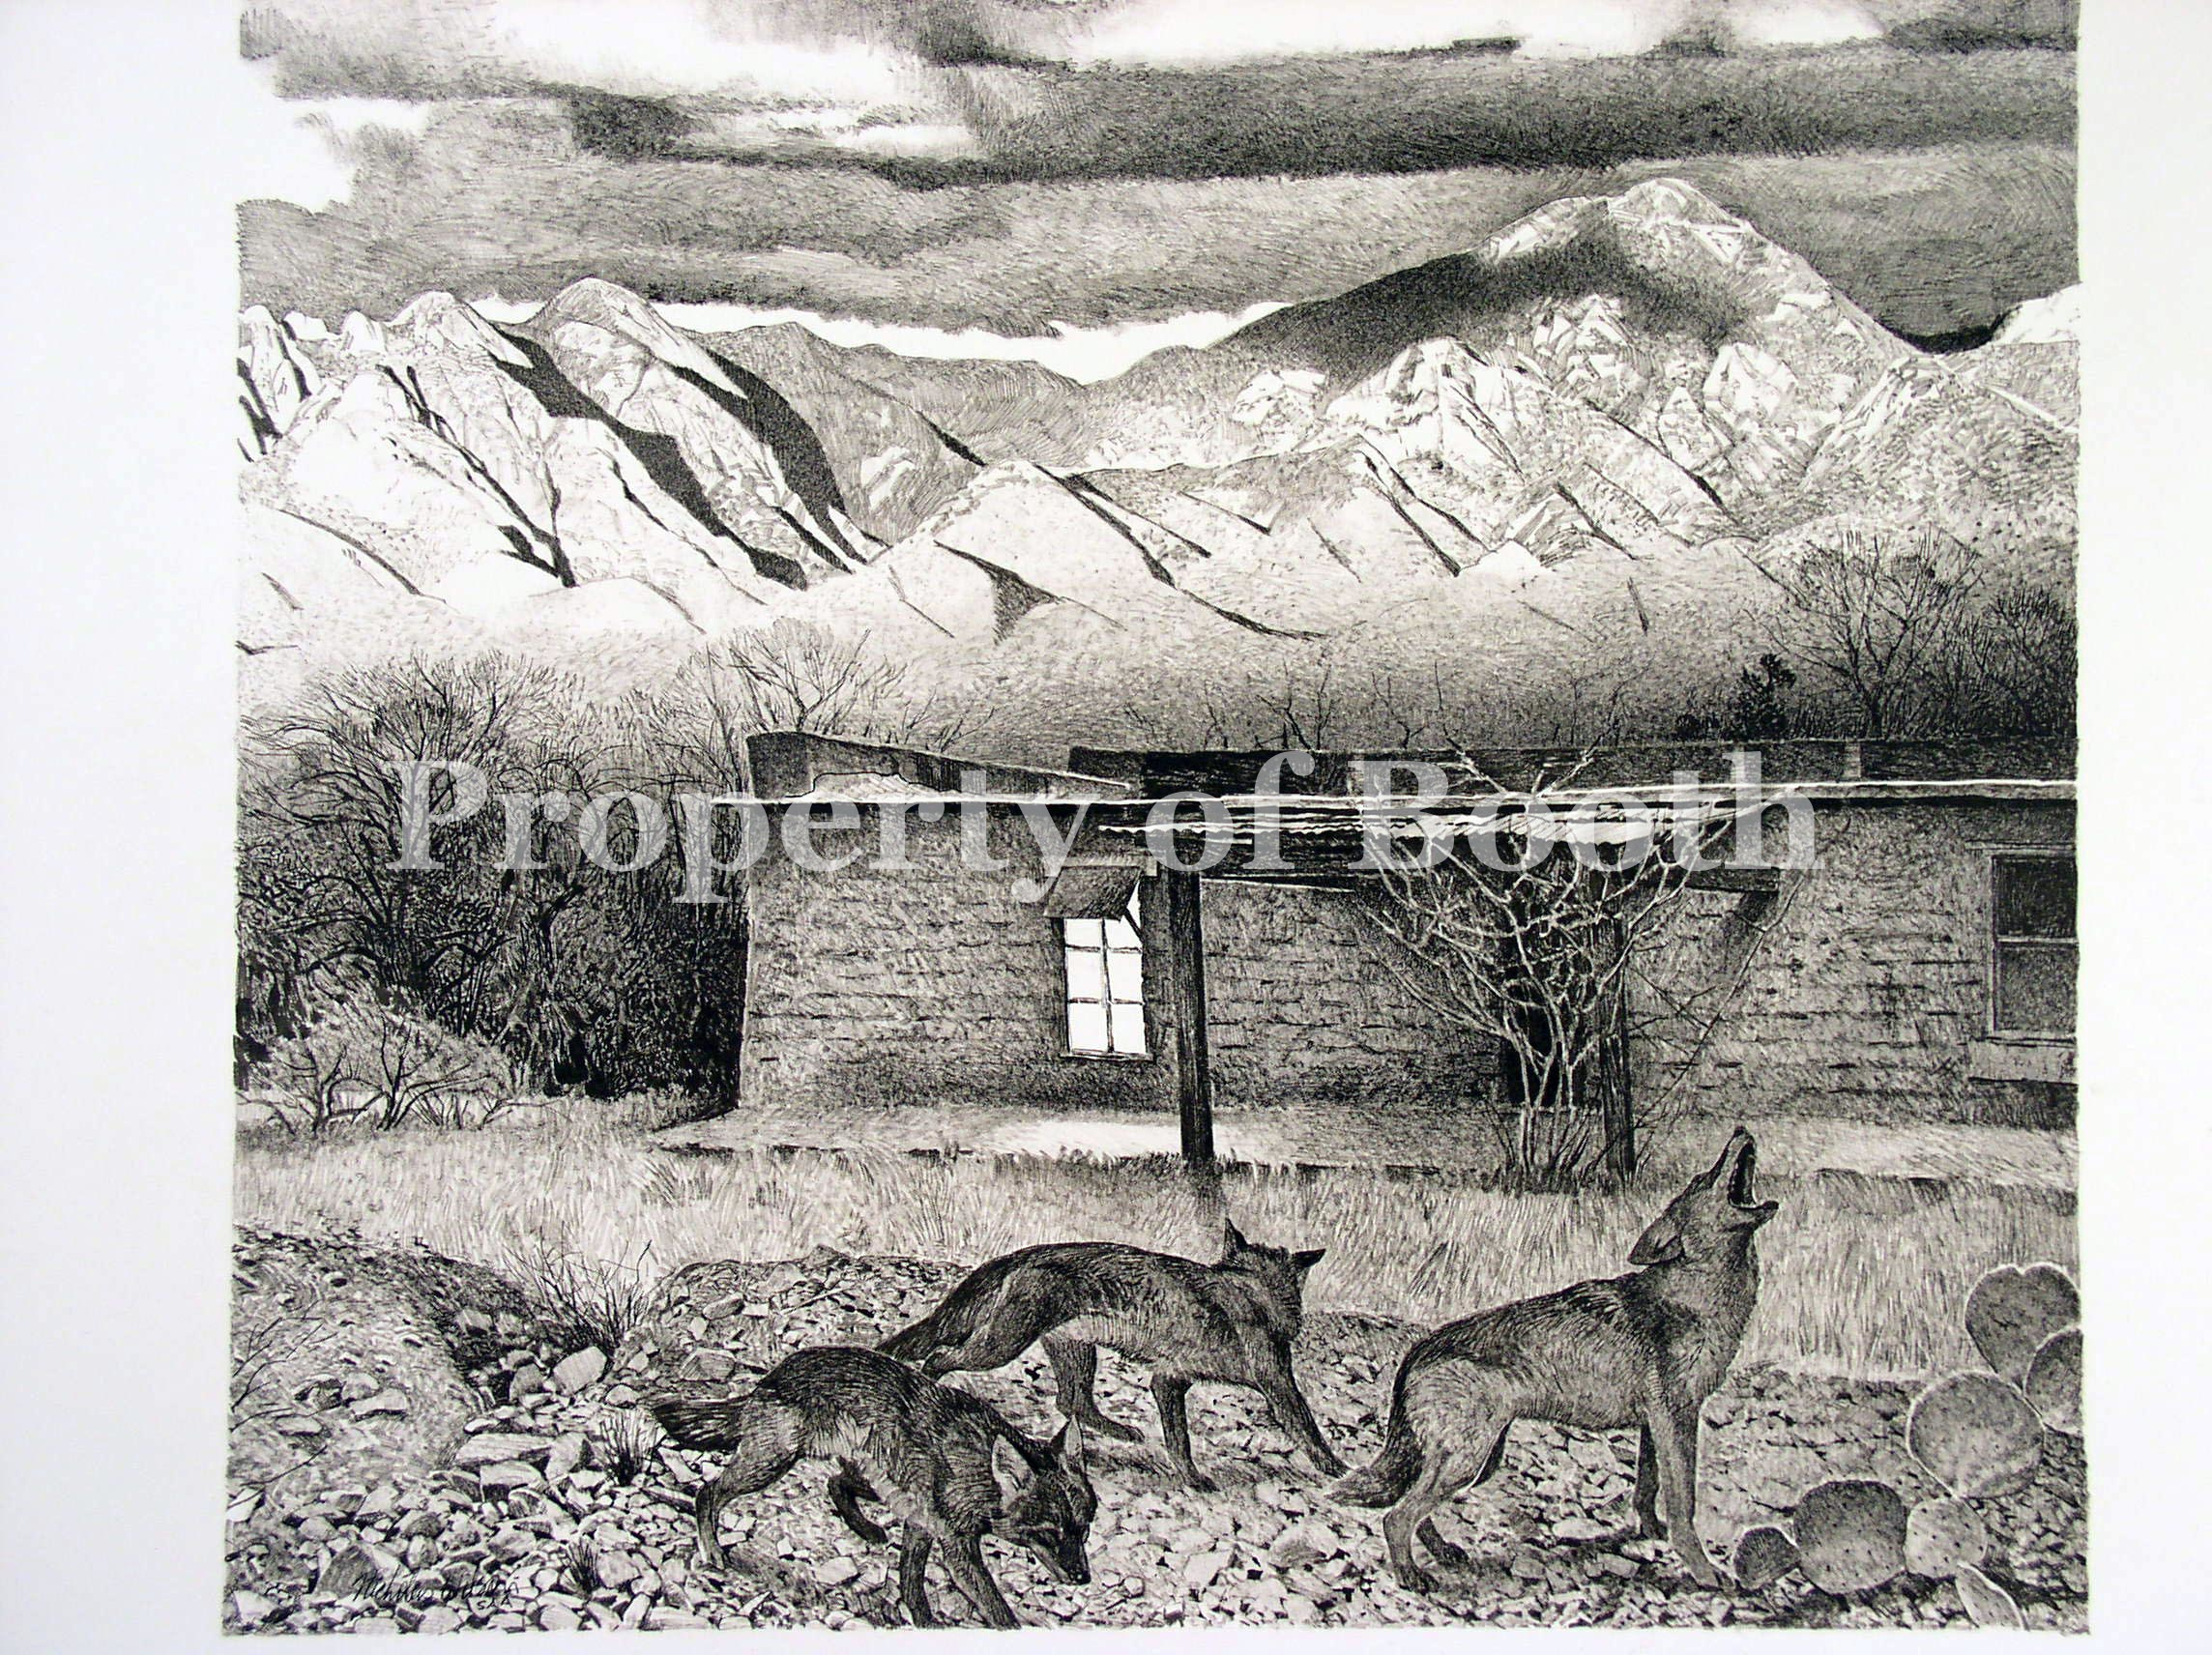 © Nicholas Wilson, Home of the Desert Rat (Preliminary brush and ink sketch), n.d., ink on paper, 22.5 x 24.75"